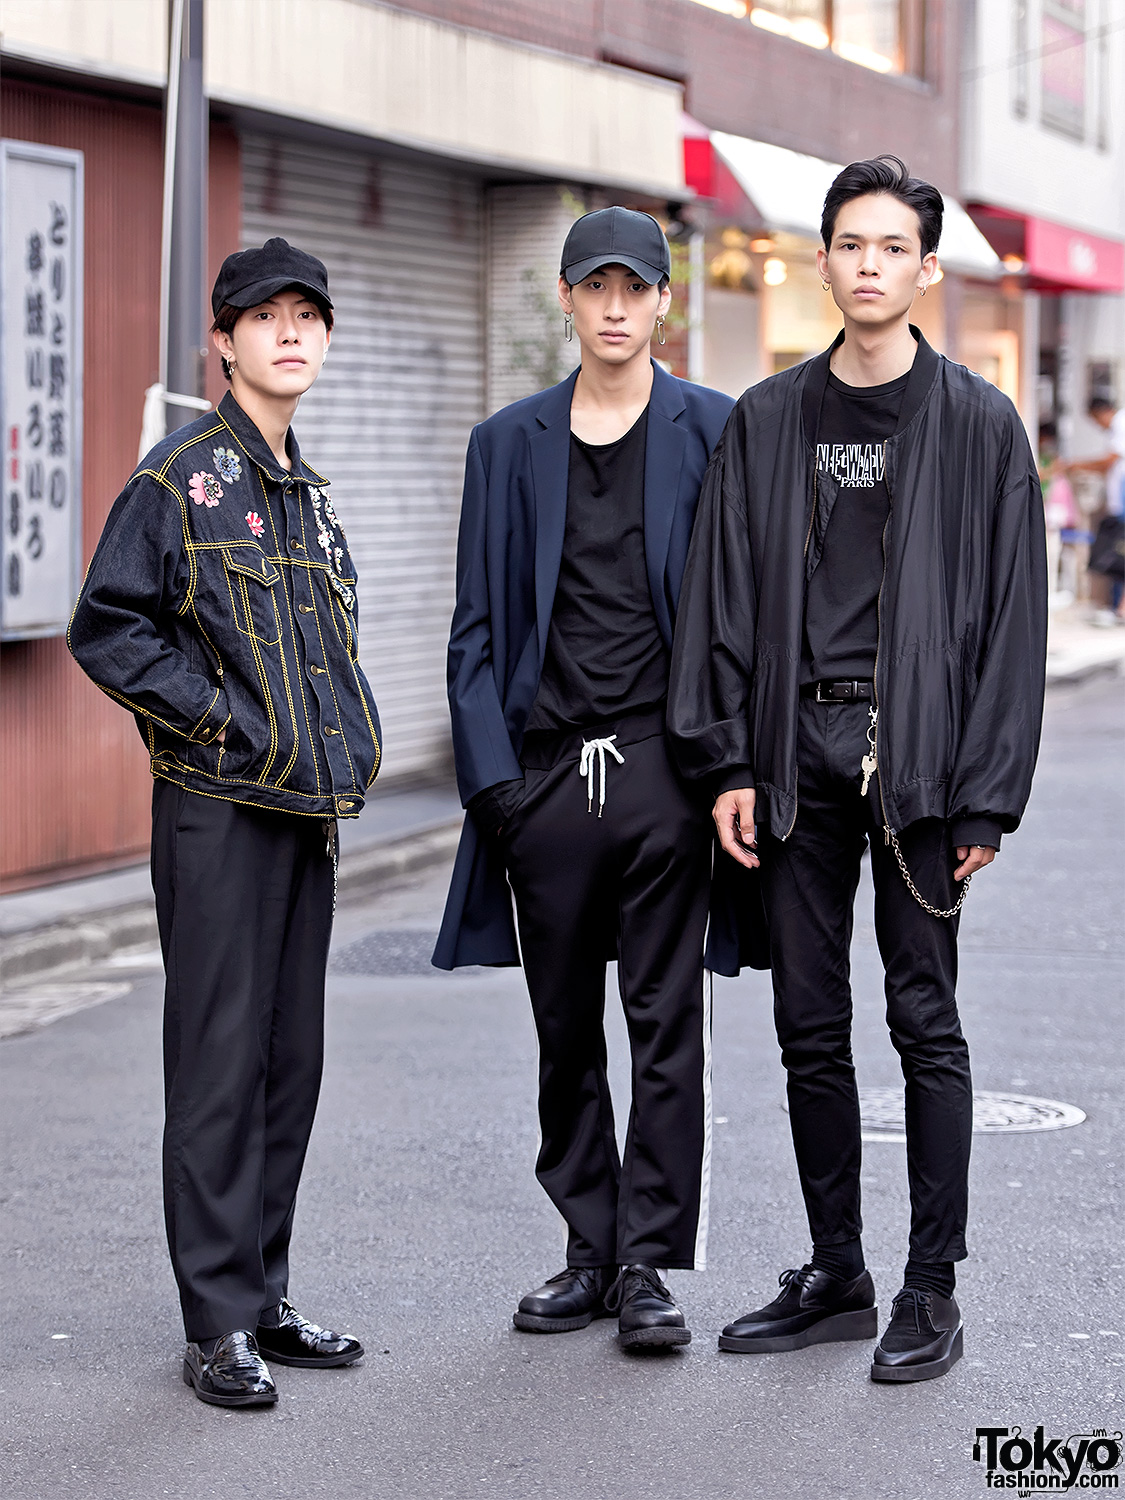 Harajuku Male Models Wearing Lad Musician, Dior Homme, and Vintage ...